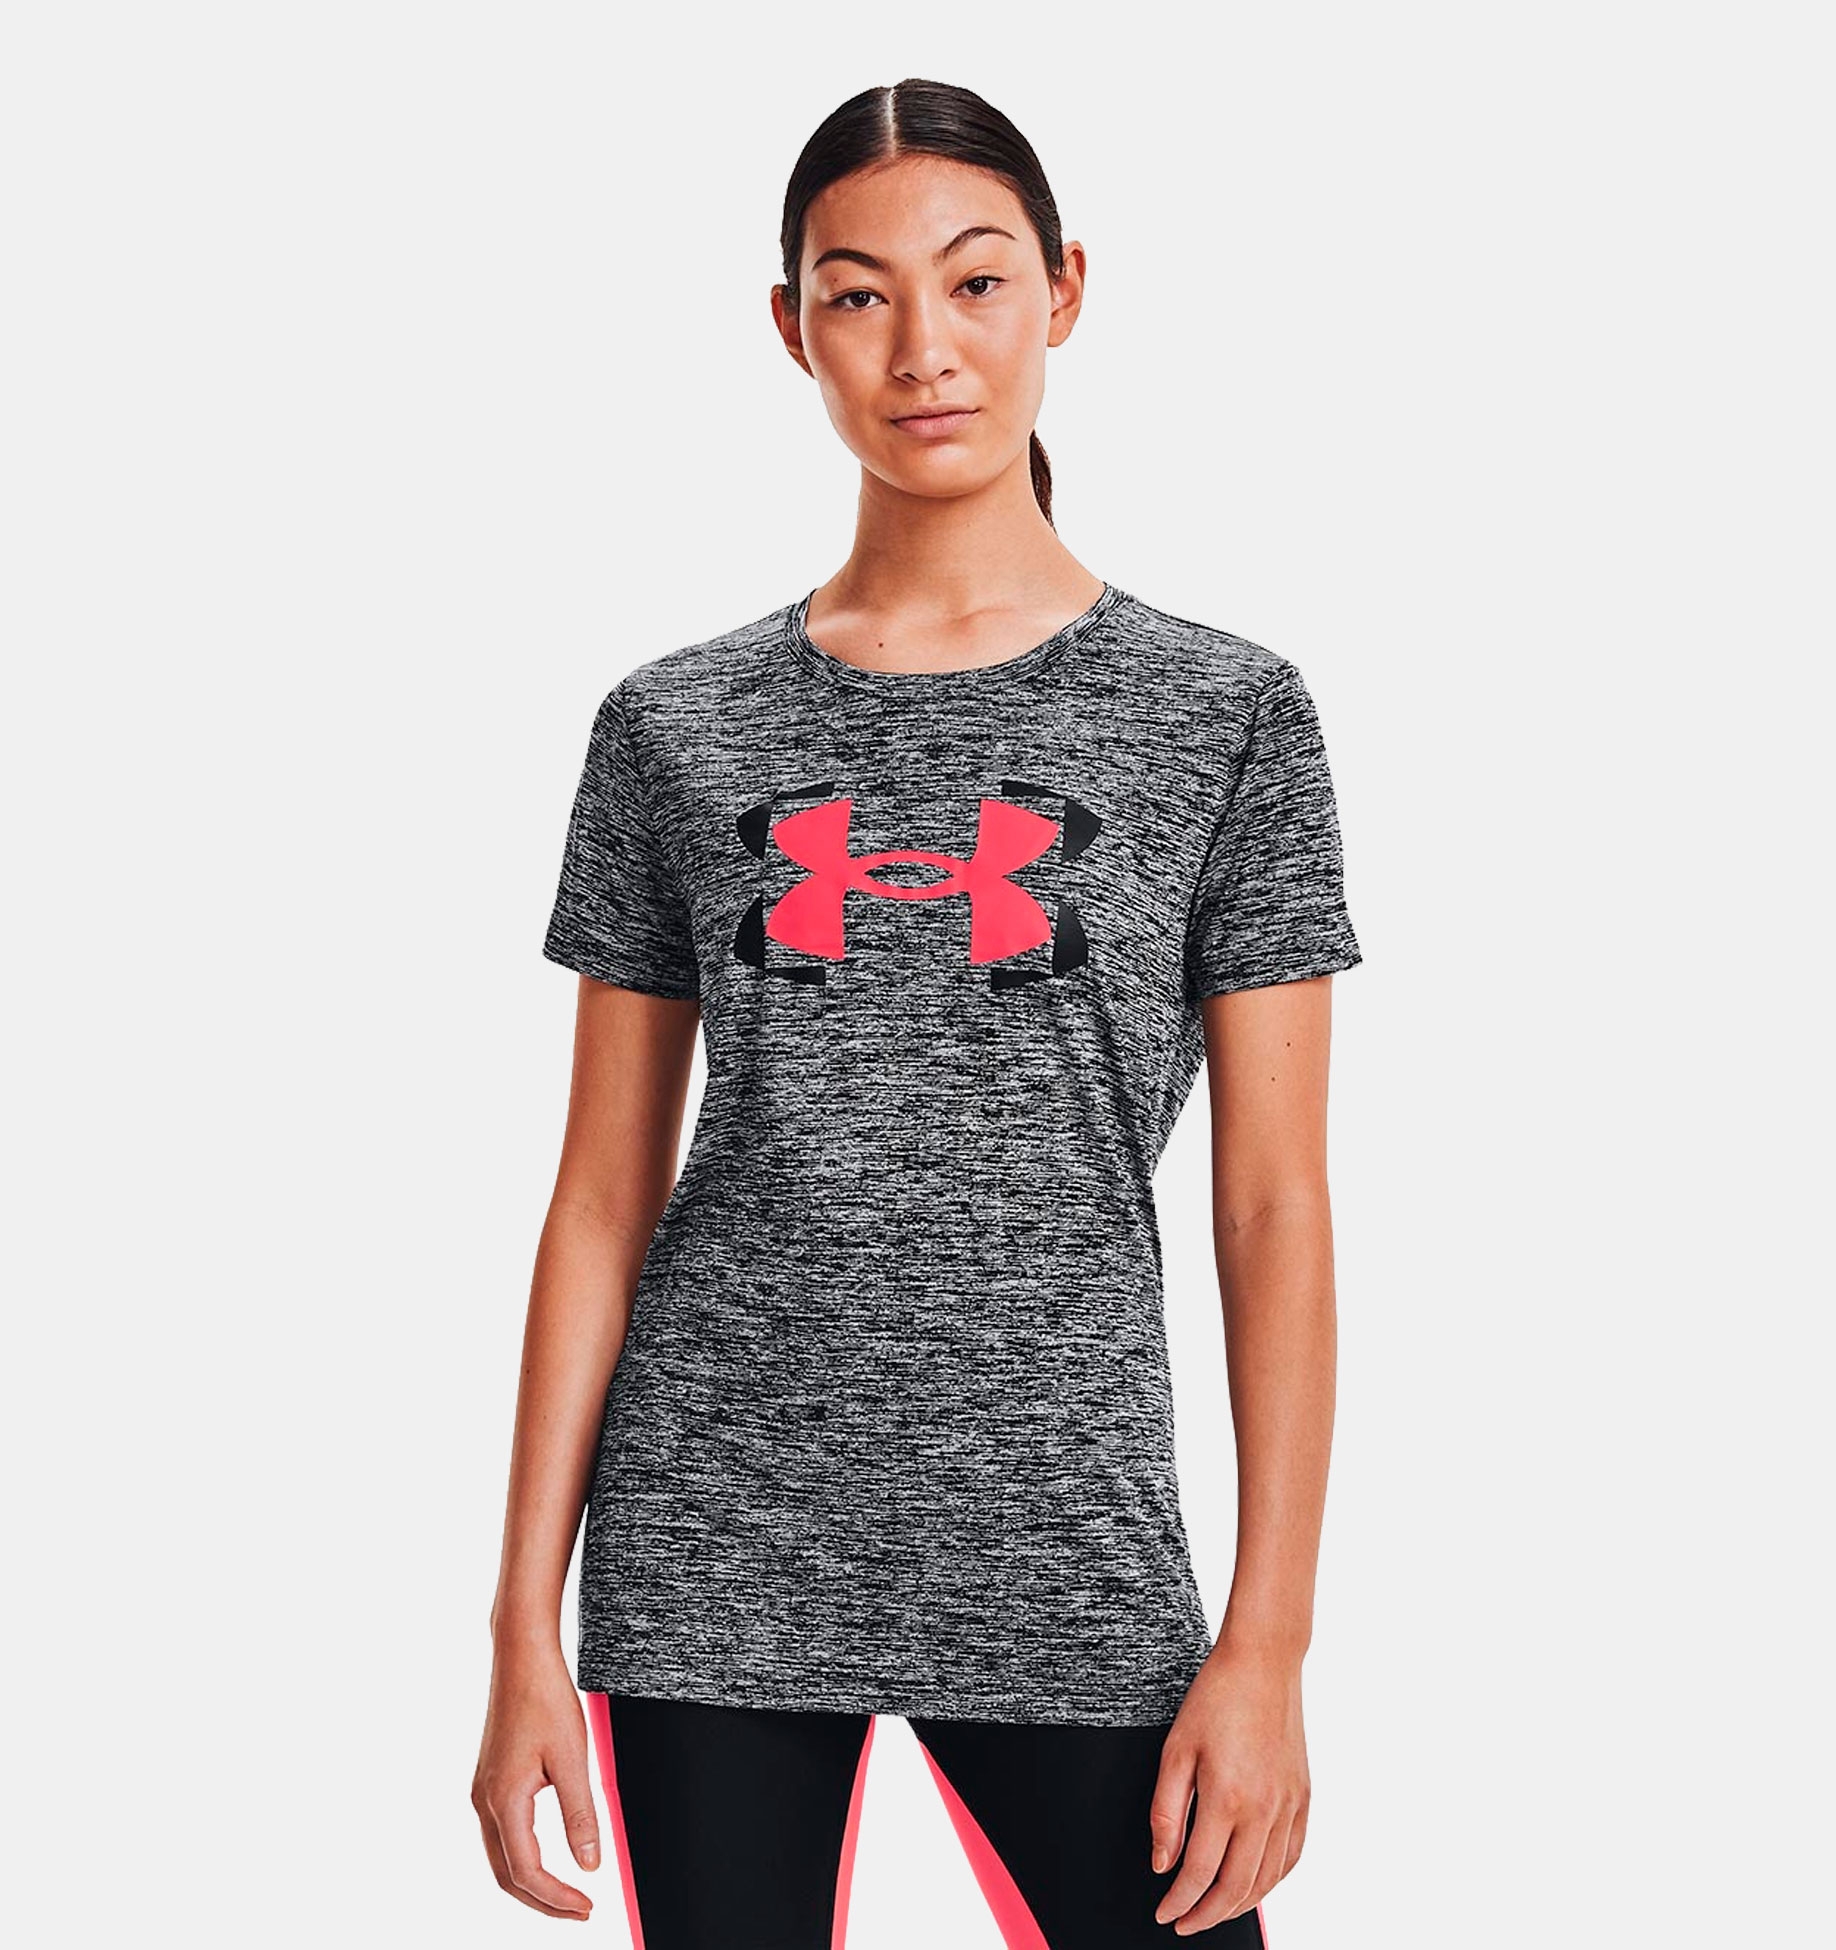 REMERA UNDER ARMOUR TECH SOLID MUJER - Seven Sport